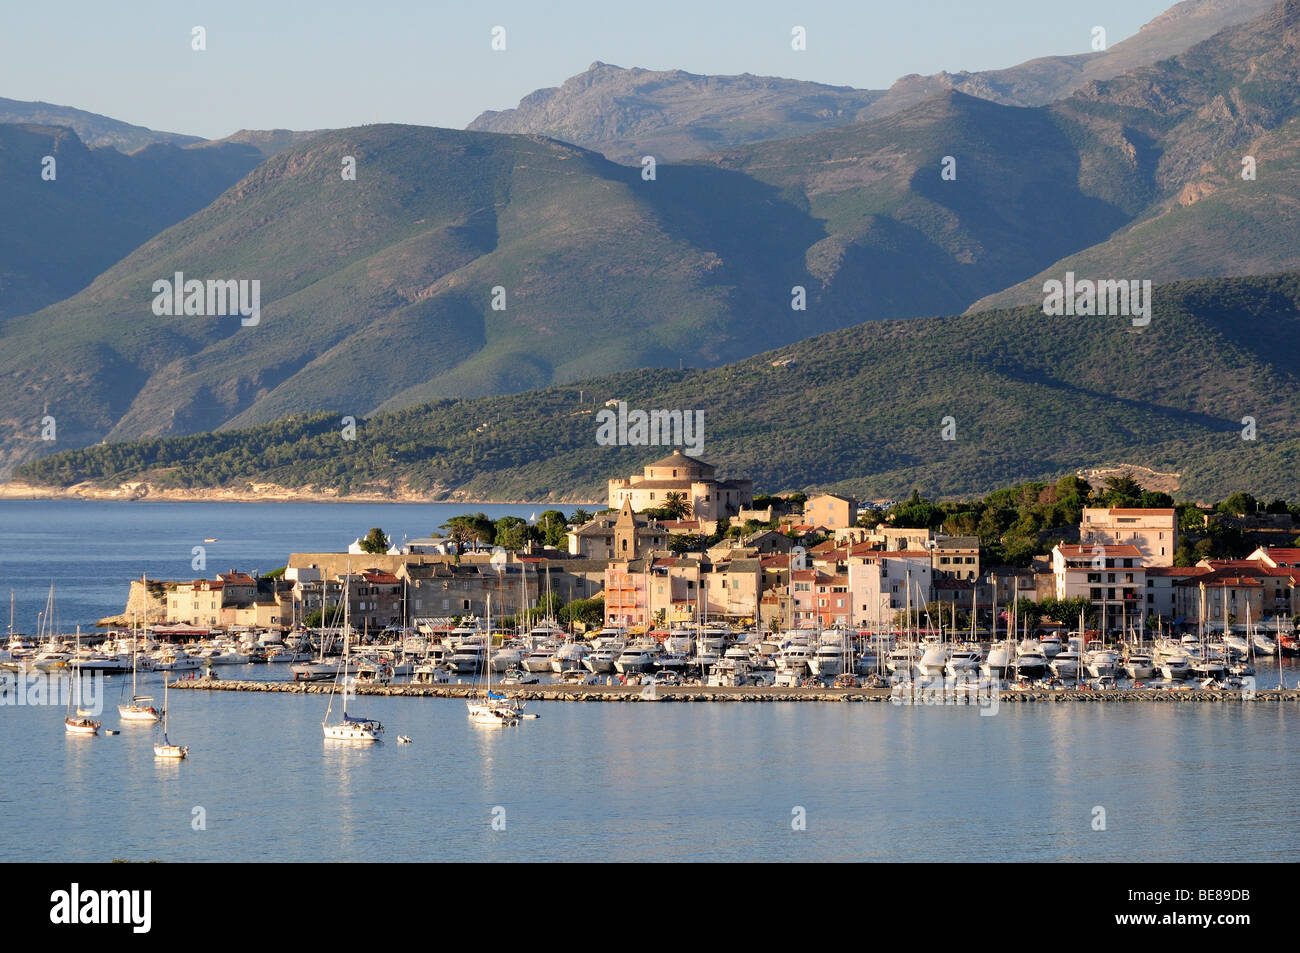 FRANCE Mediterranean Corsica St Florent View of Old Town and  harbour with yachts moored situated at the base of mountains. Stock Photo